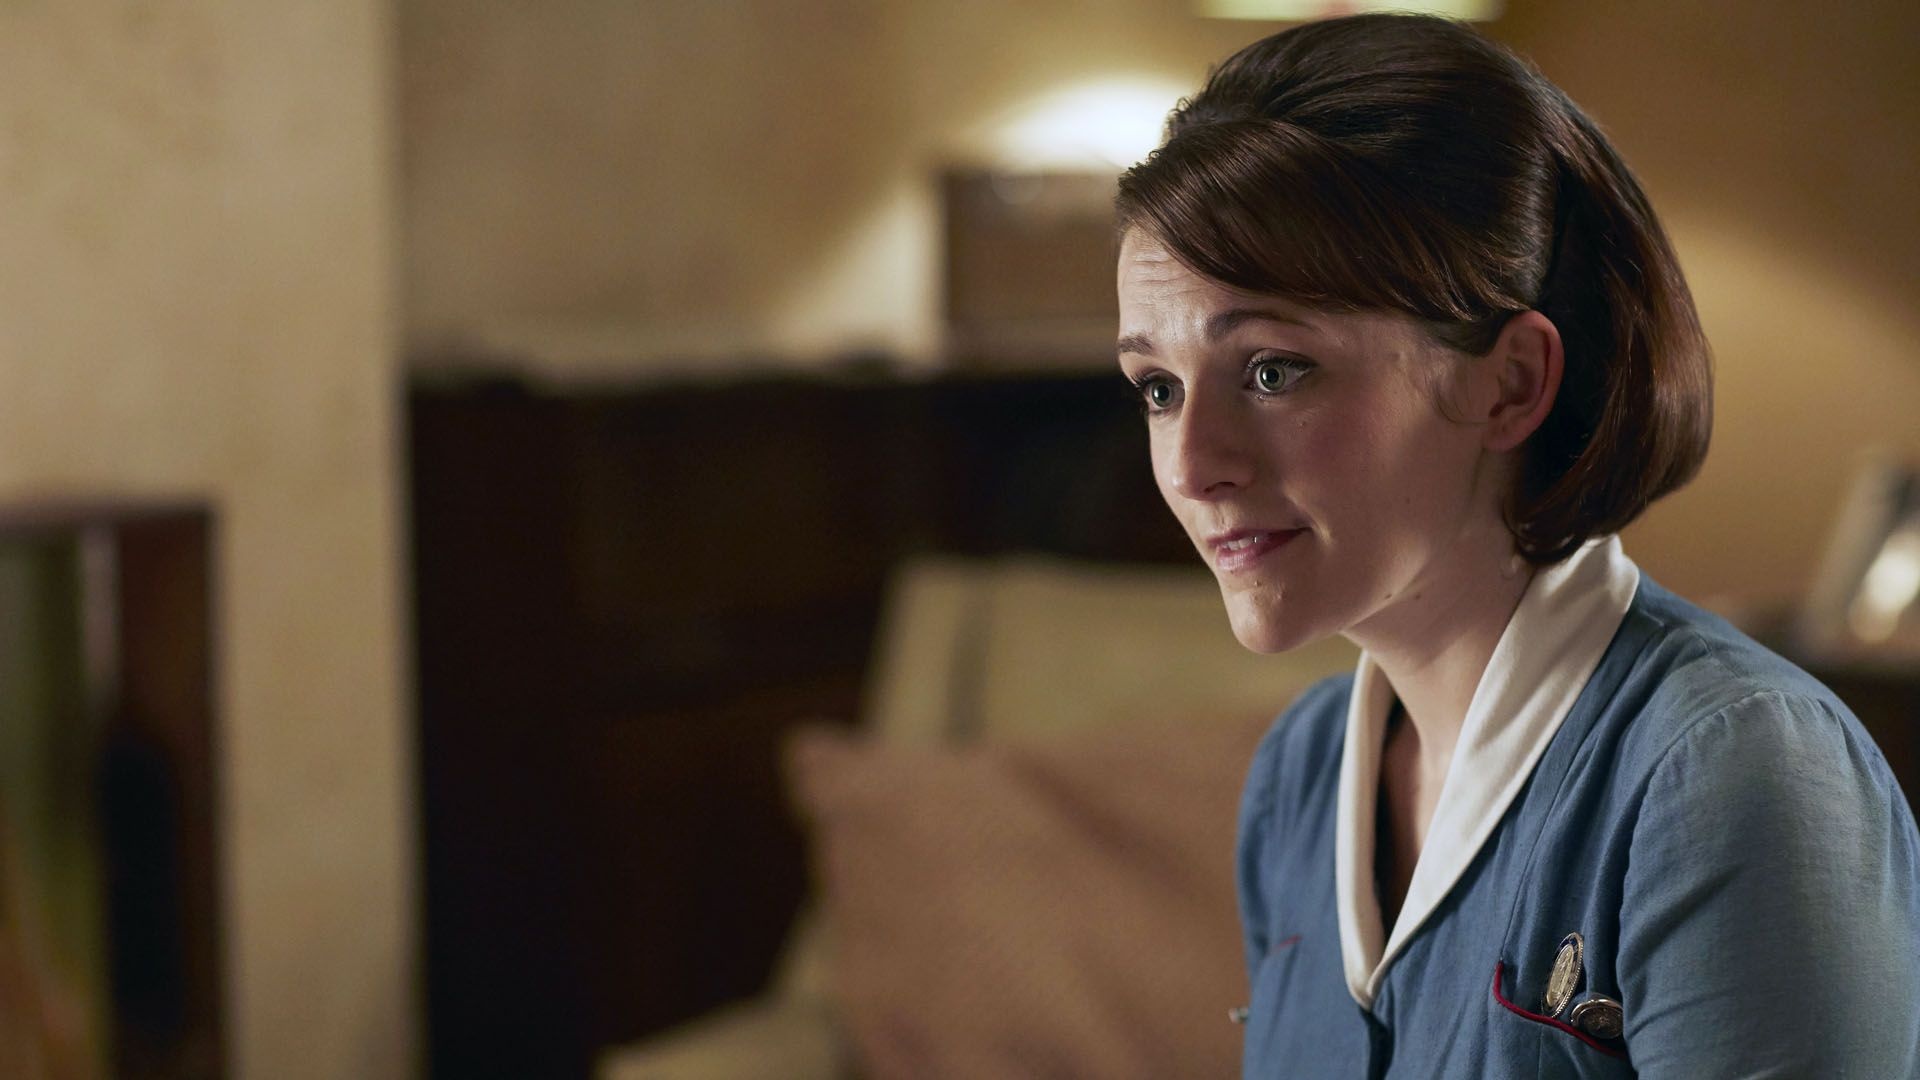 Call the Midwife, Complete song list, TuneFind, 1920x1080 Full HD Desktop